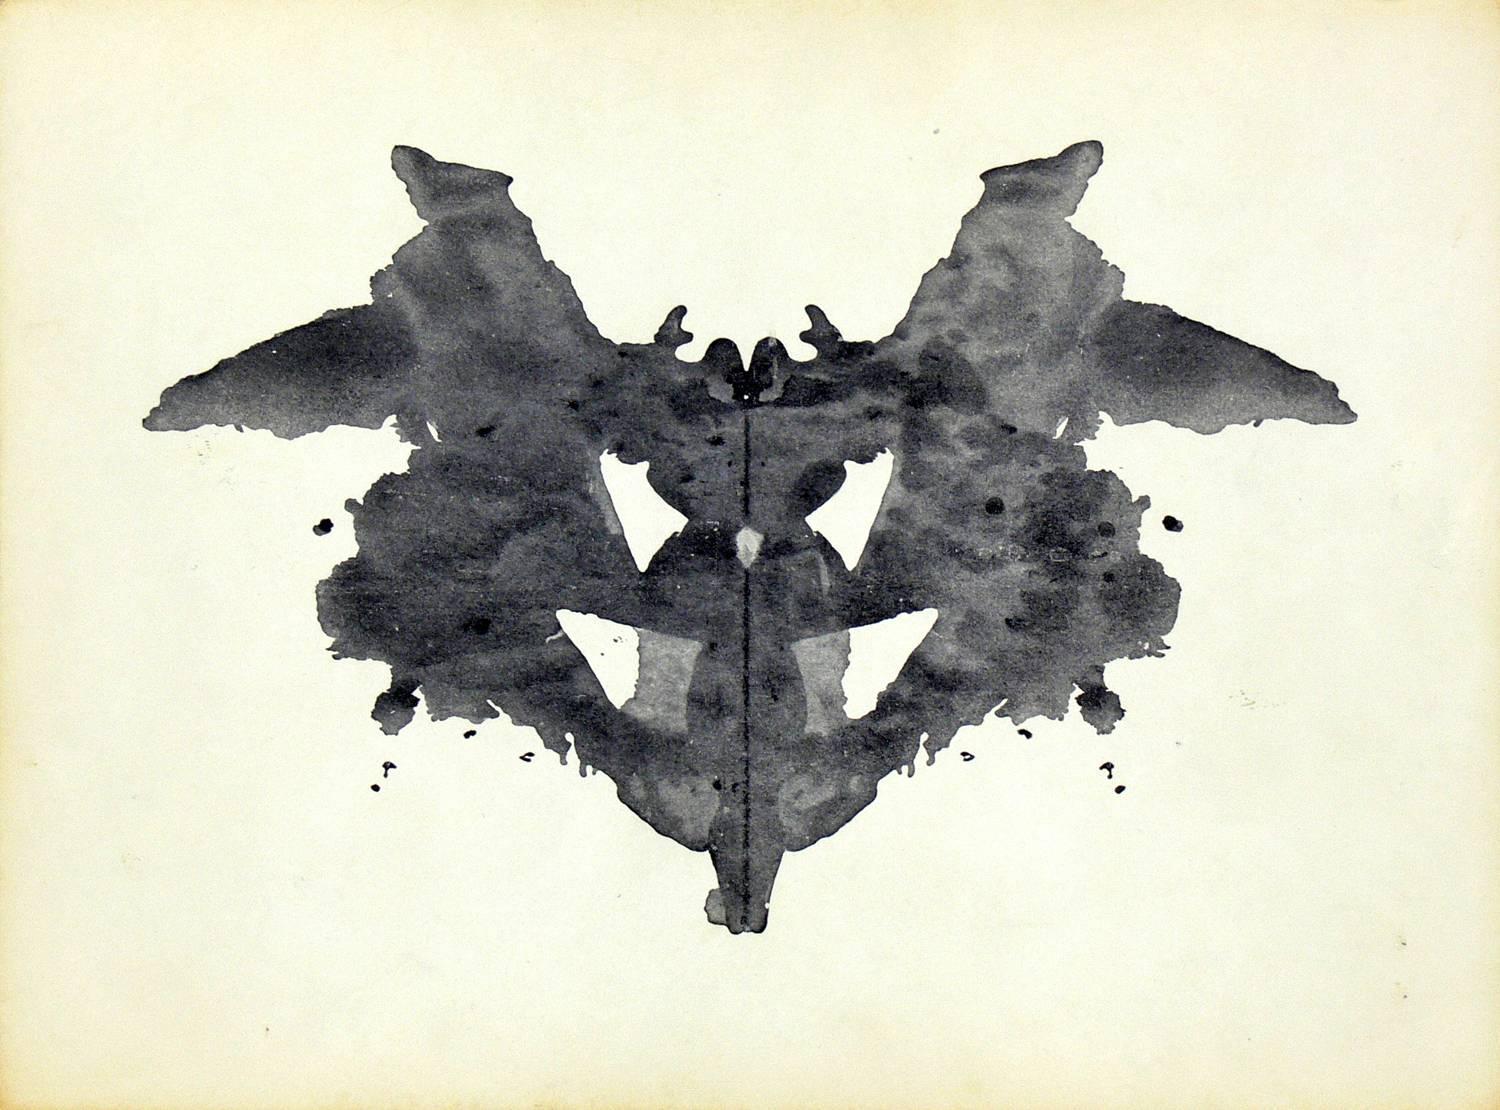 Group of original abstract Rorschach inkblot test prints, circa 1950s. Framed in clean lined black gallery frames. Originally created in 1921 by Hermann Rorschach for psychodiagnostics, these framed works have a wonderful abstract feel and are a